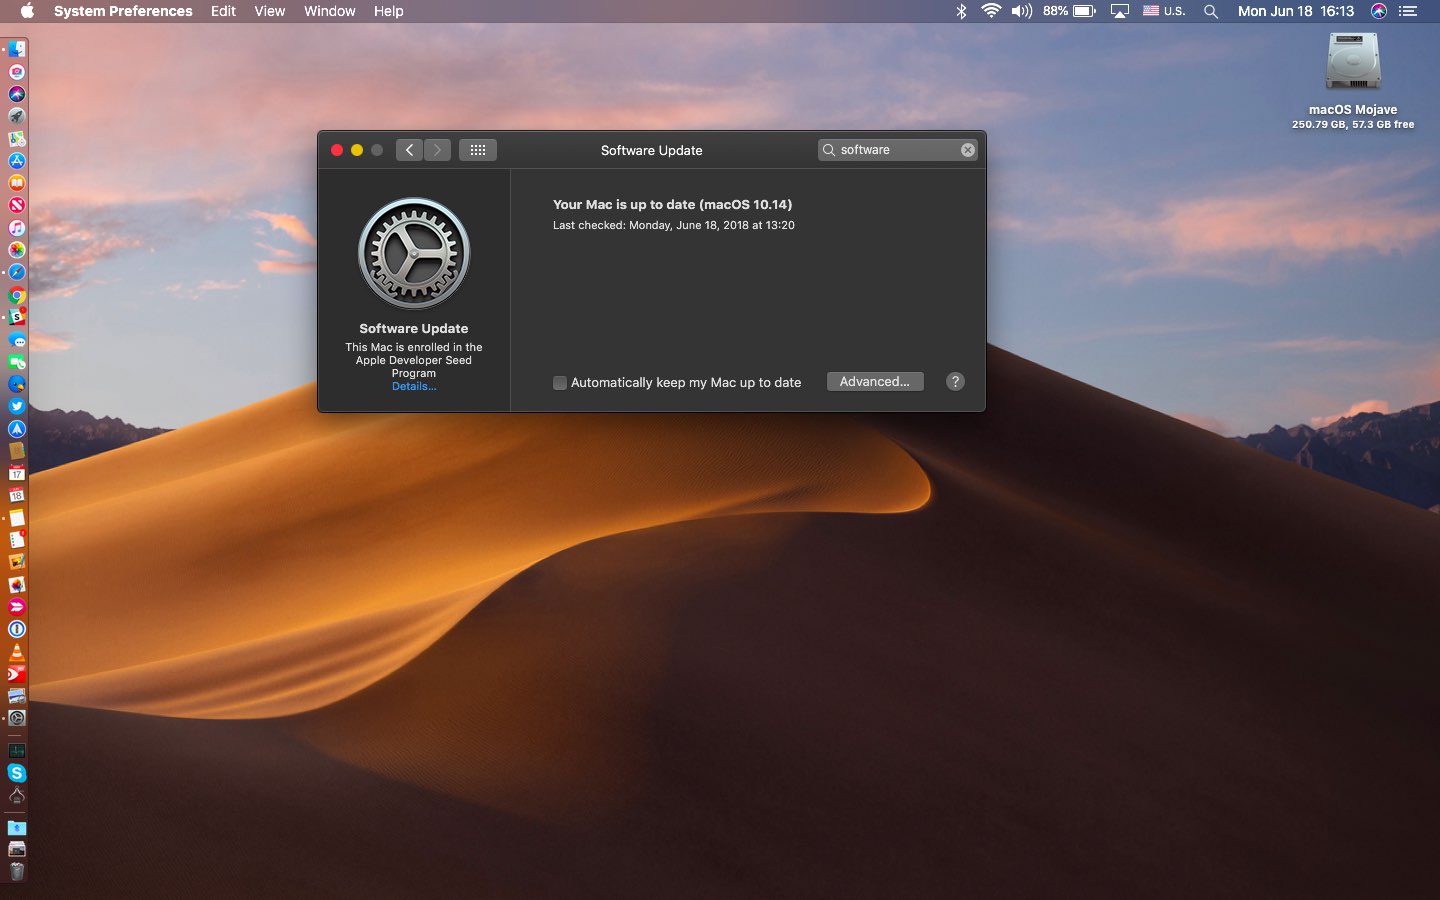 The Mac Software Update mechanism has its own preference pane on macOS Mojave